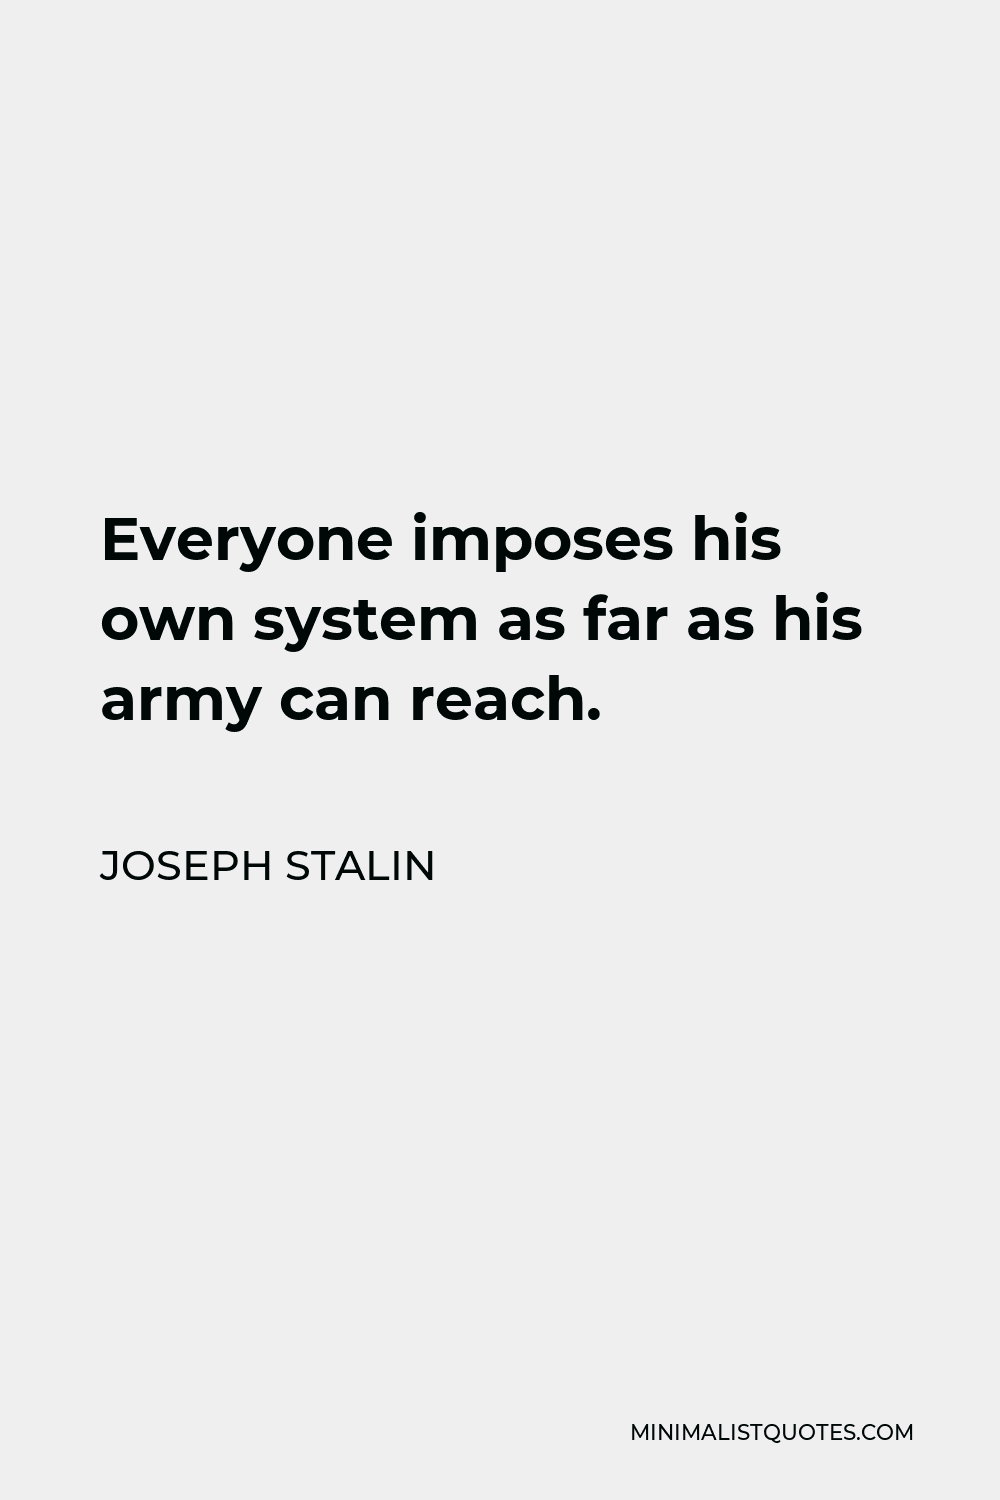 Joseph Stalin Quote - Everyone imposes his own system as far as his army can reach.